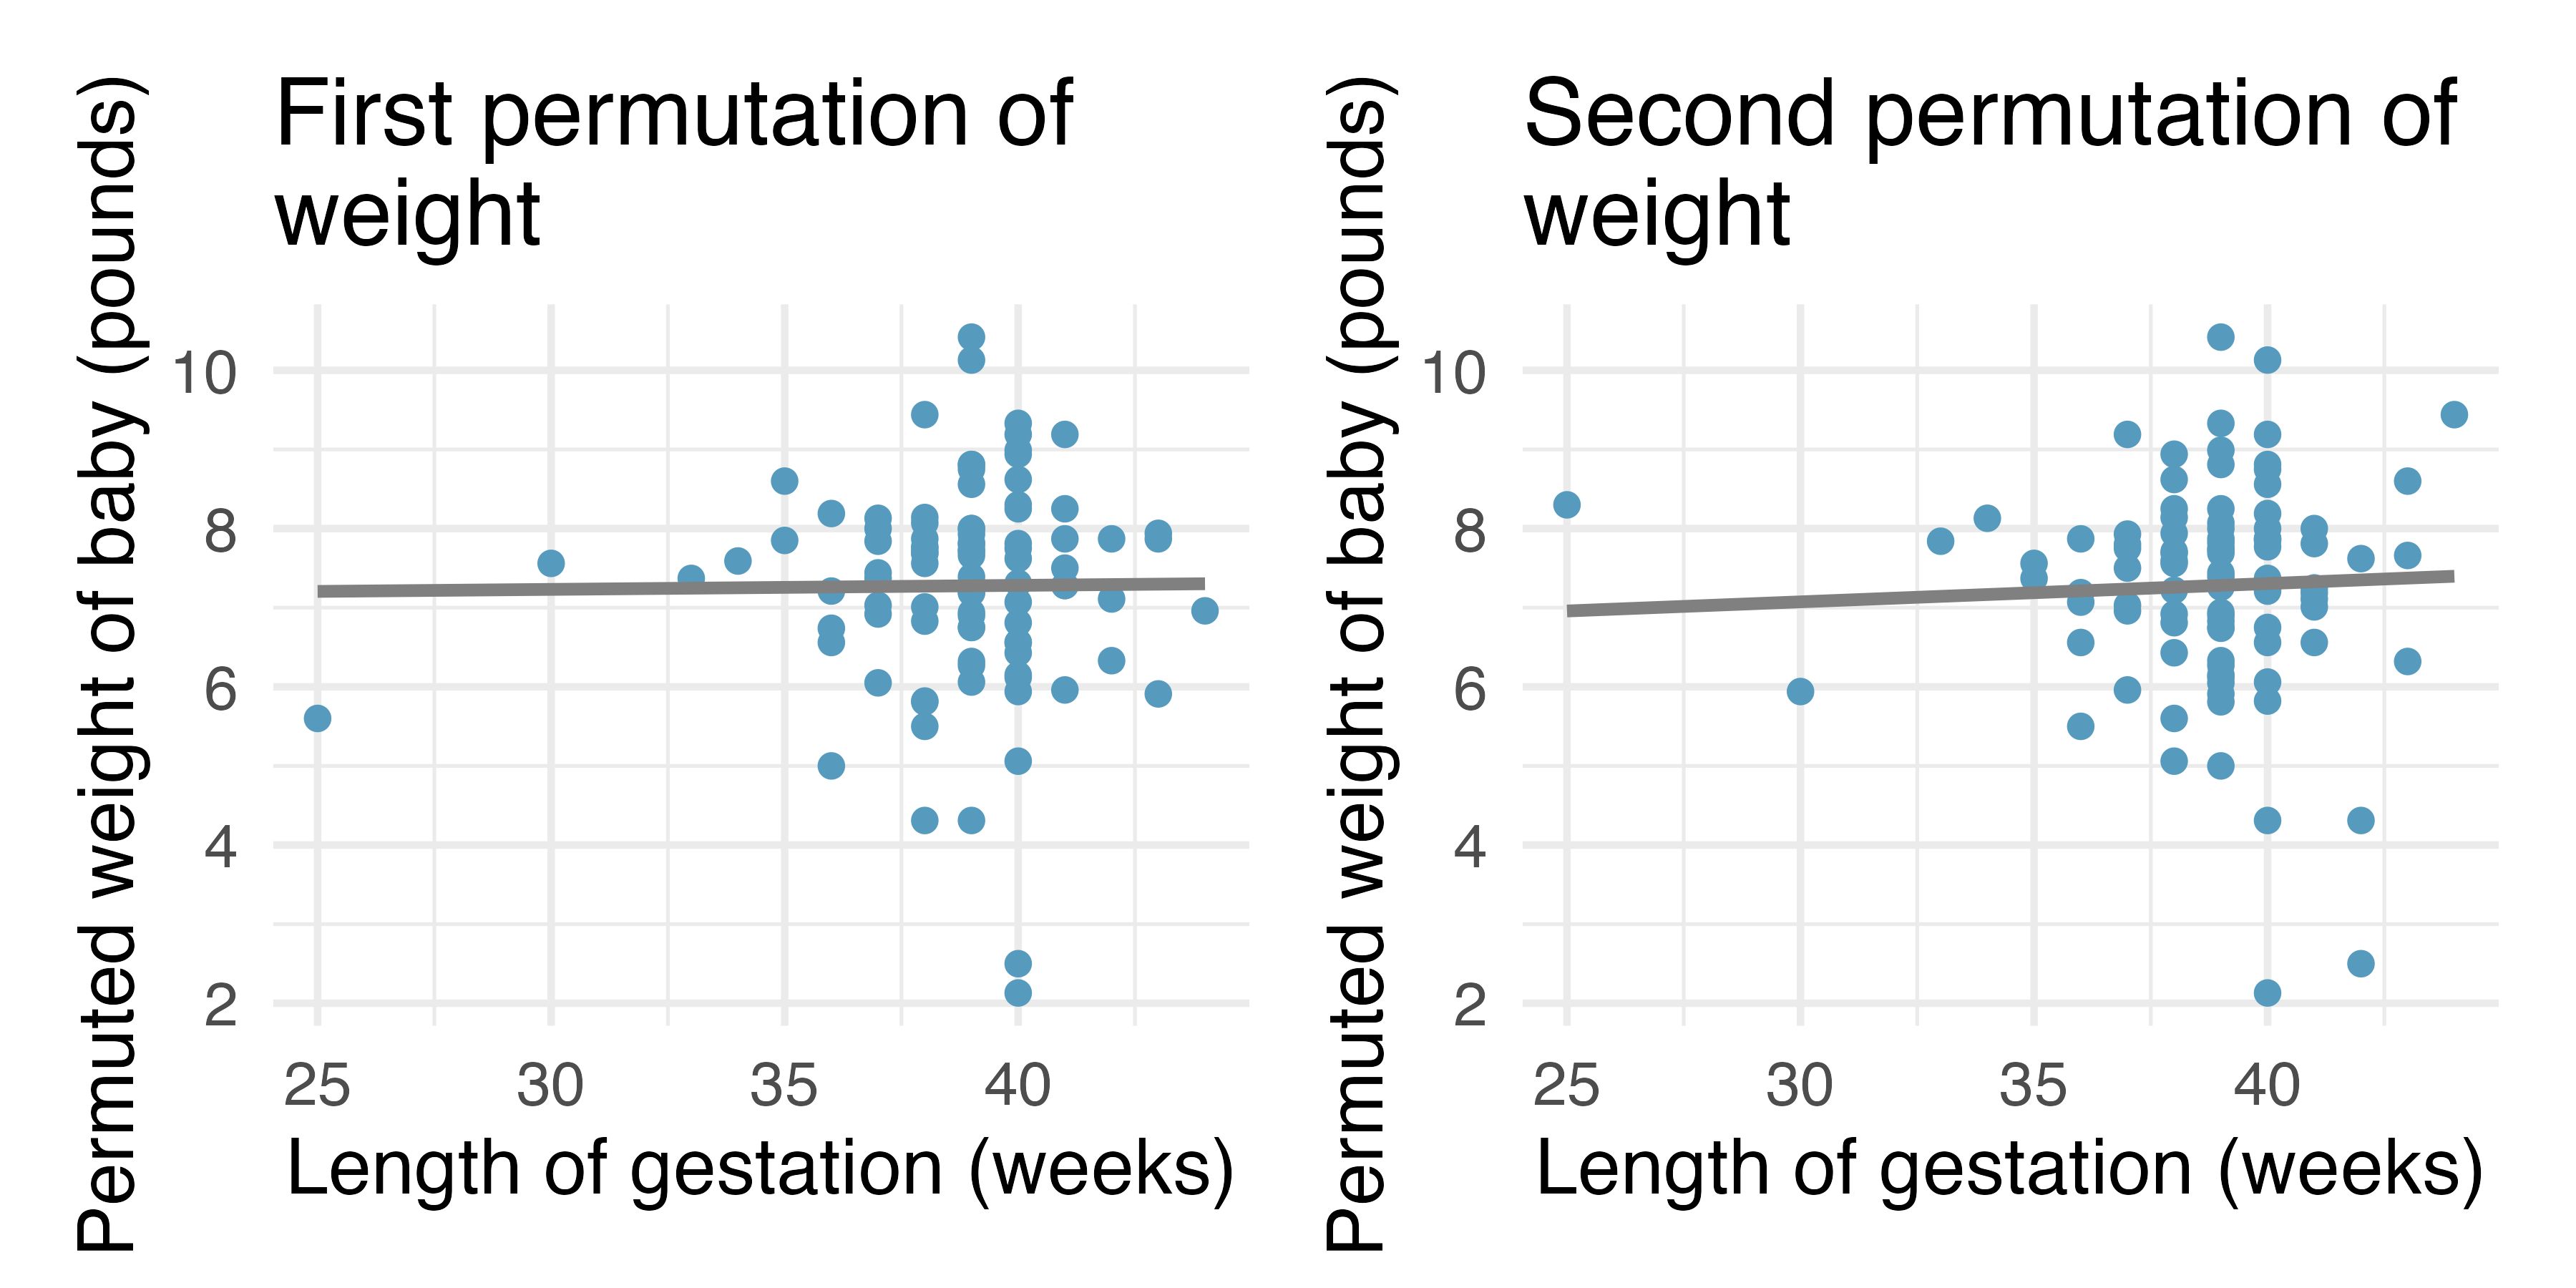 Two scatterplots, both with length of gestation on the x-axis and weight of baby on the y-axis.  Each plot includes data where the weight of the baby has been permuted across the observations.  The two different permutations produce slightly different least squares regression lines.